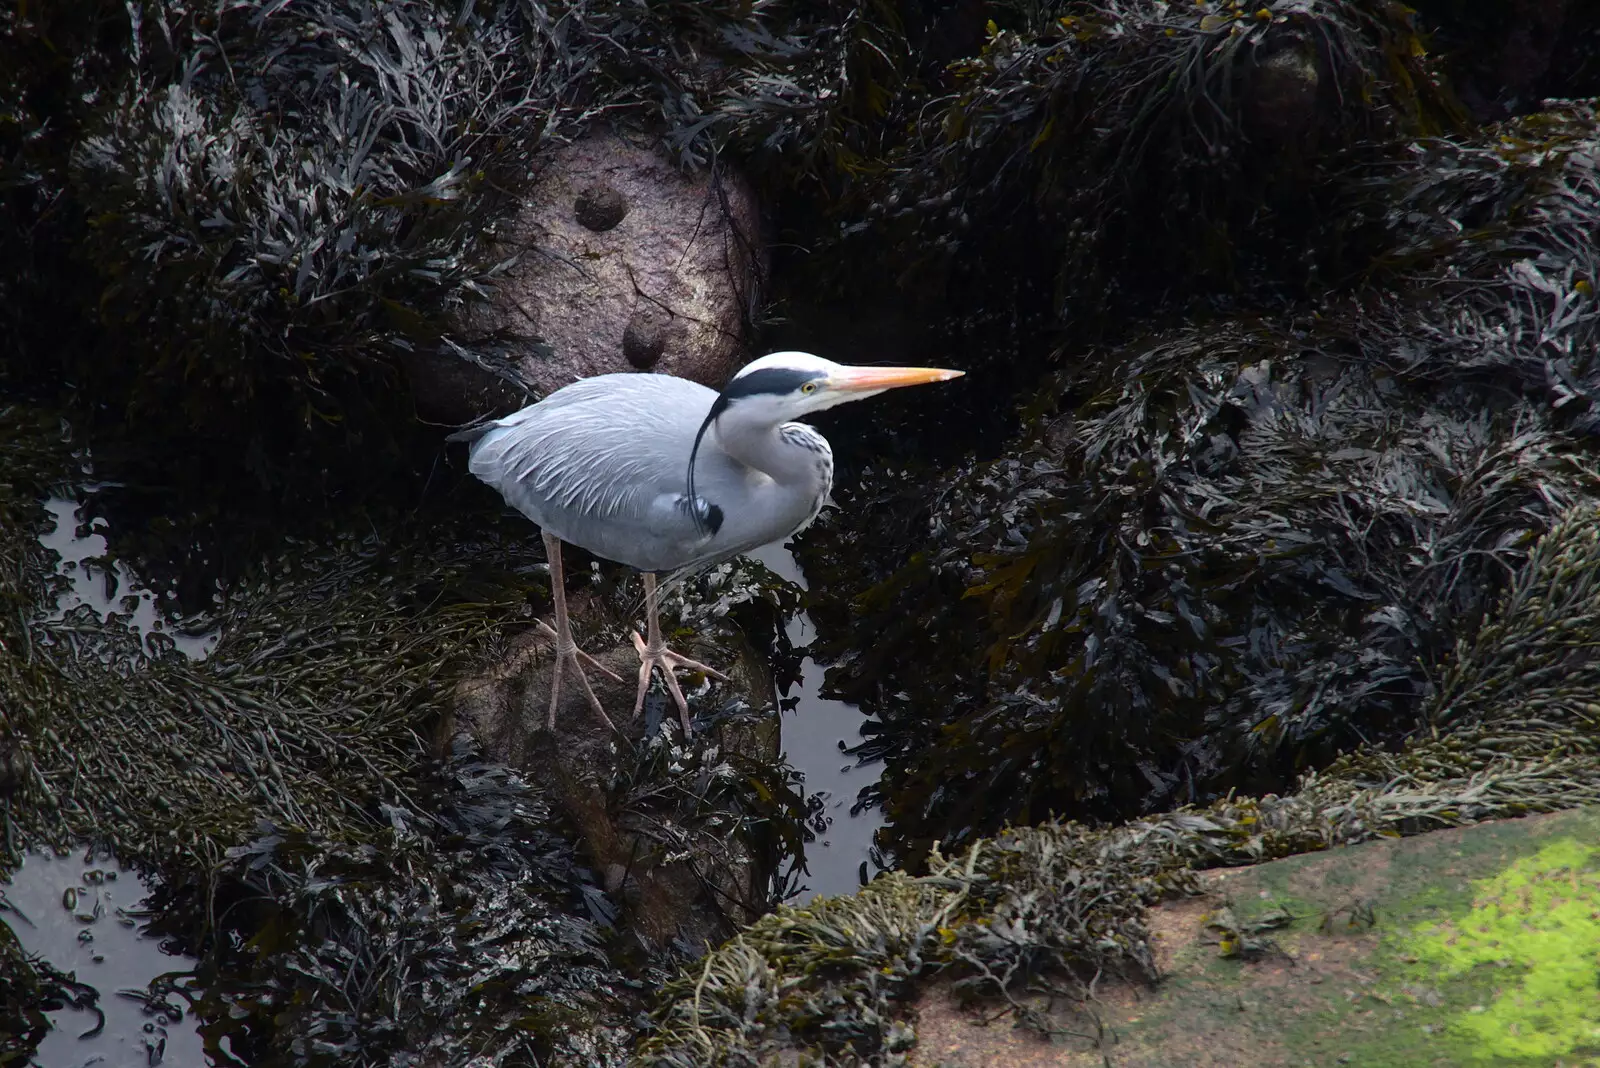 There's a heron in the rocks, from The End of the Breffni, Blackrock, Dublin - 18th February 2023